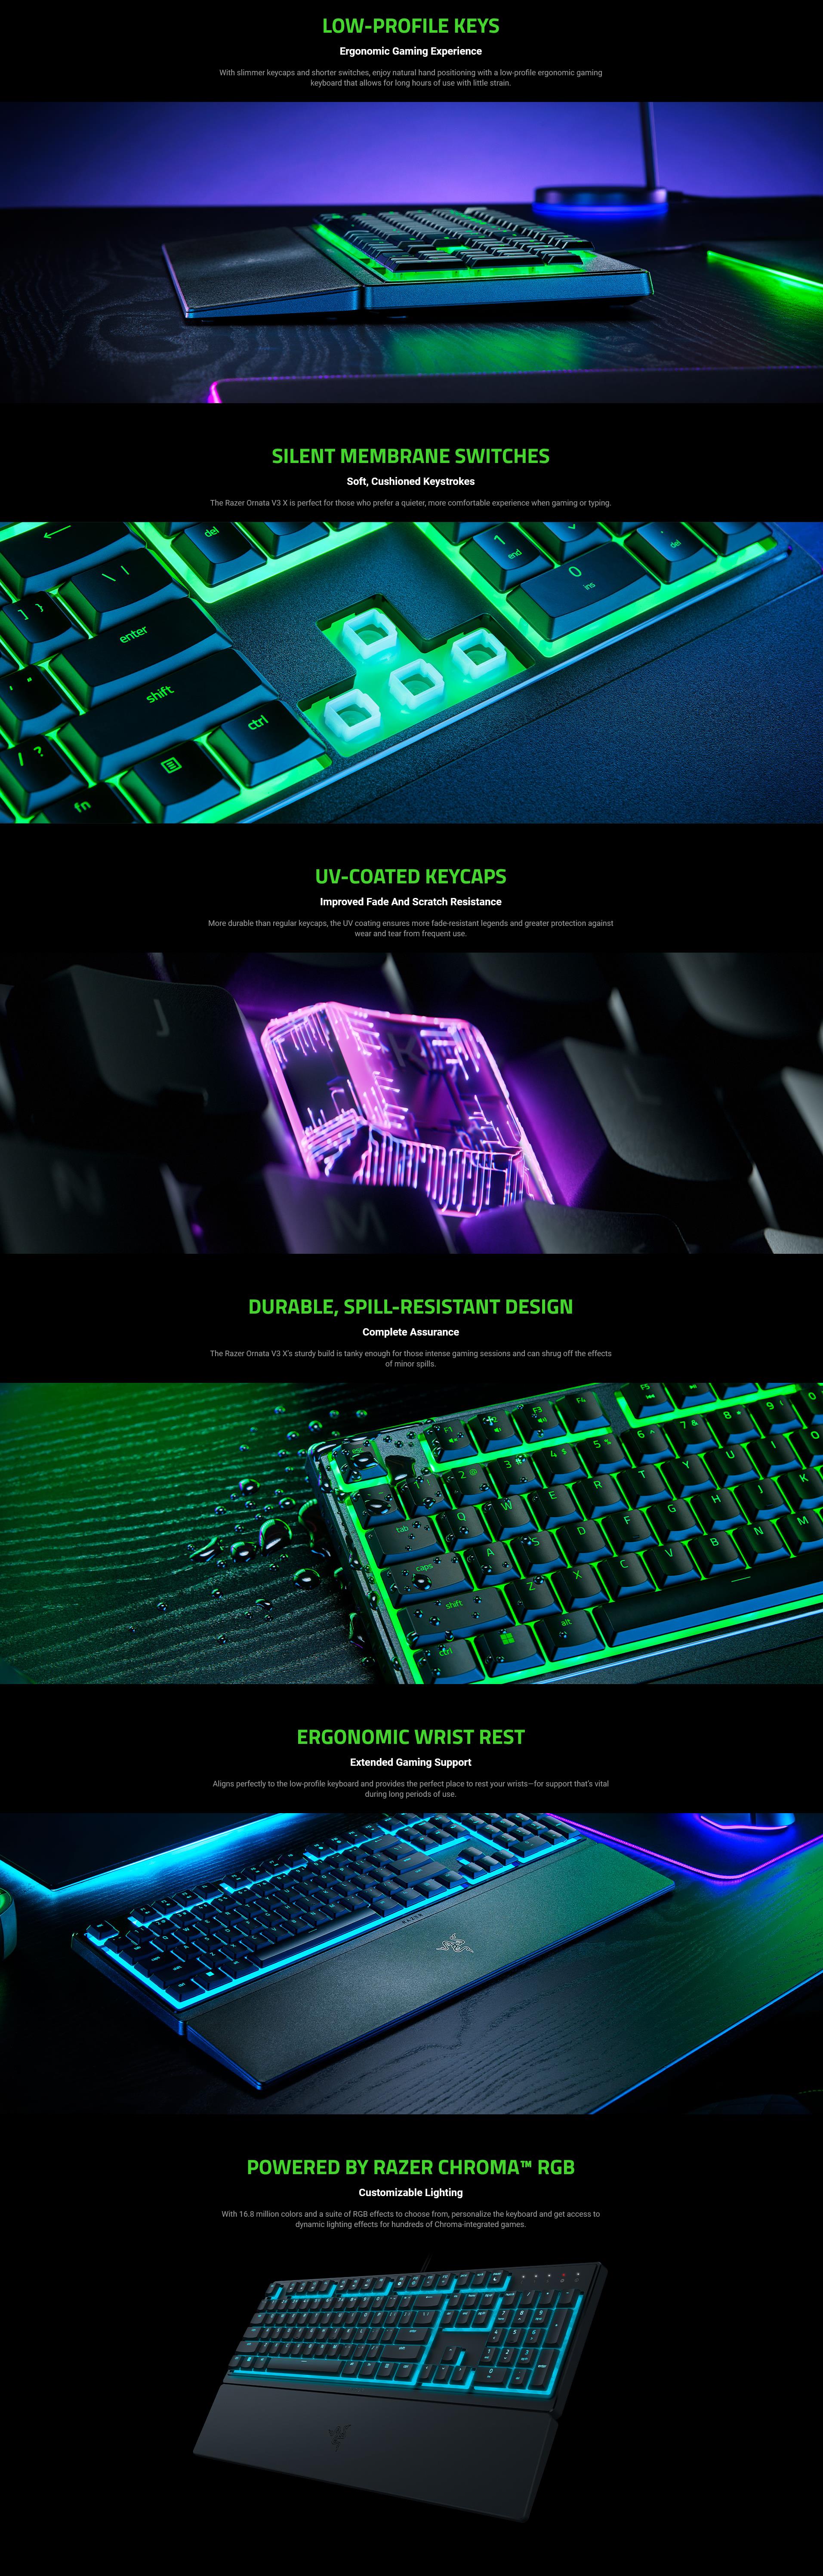 A large marketing image providing additional information about the product Razer Ornata V3 X - Low Profile Gaming Keyboard - Additional alt info not provided